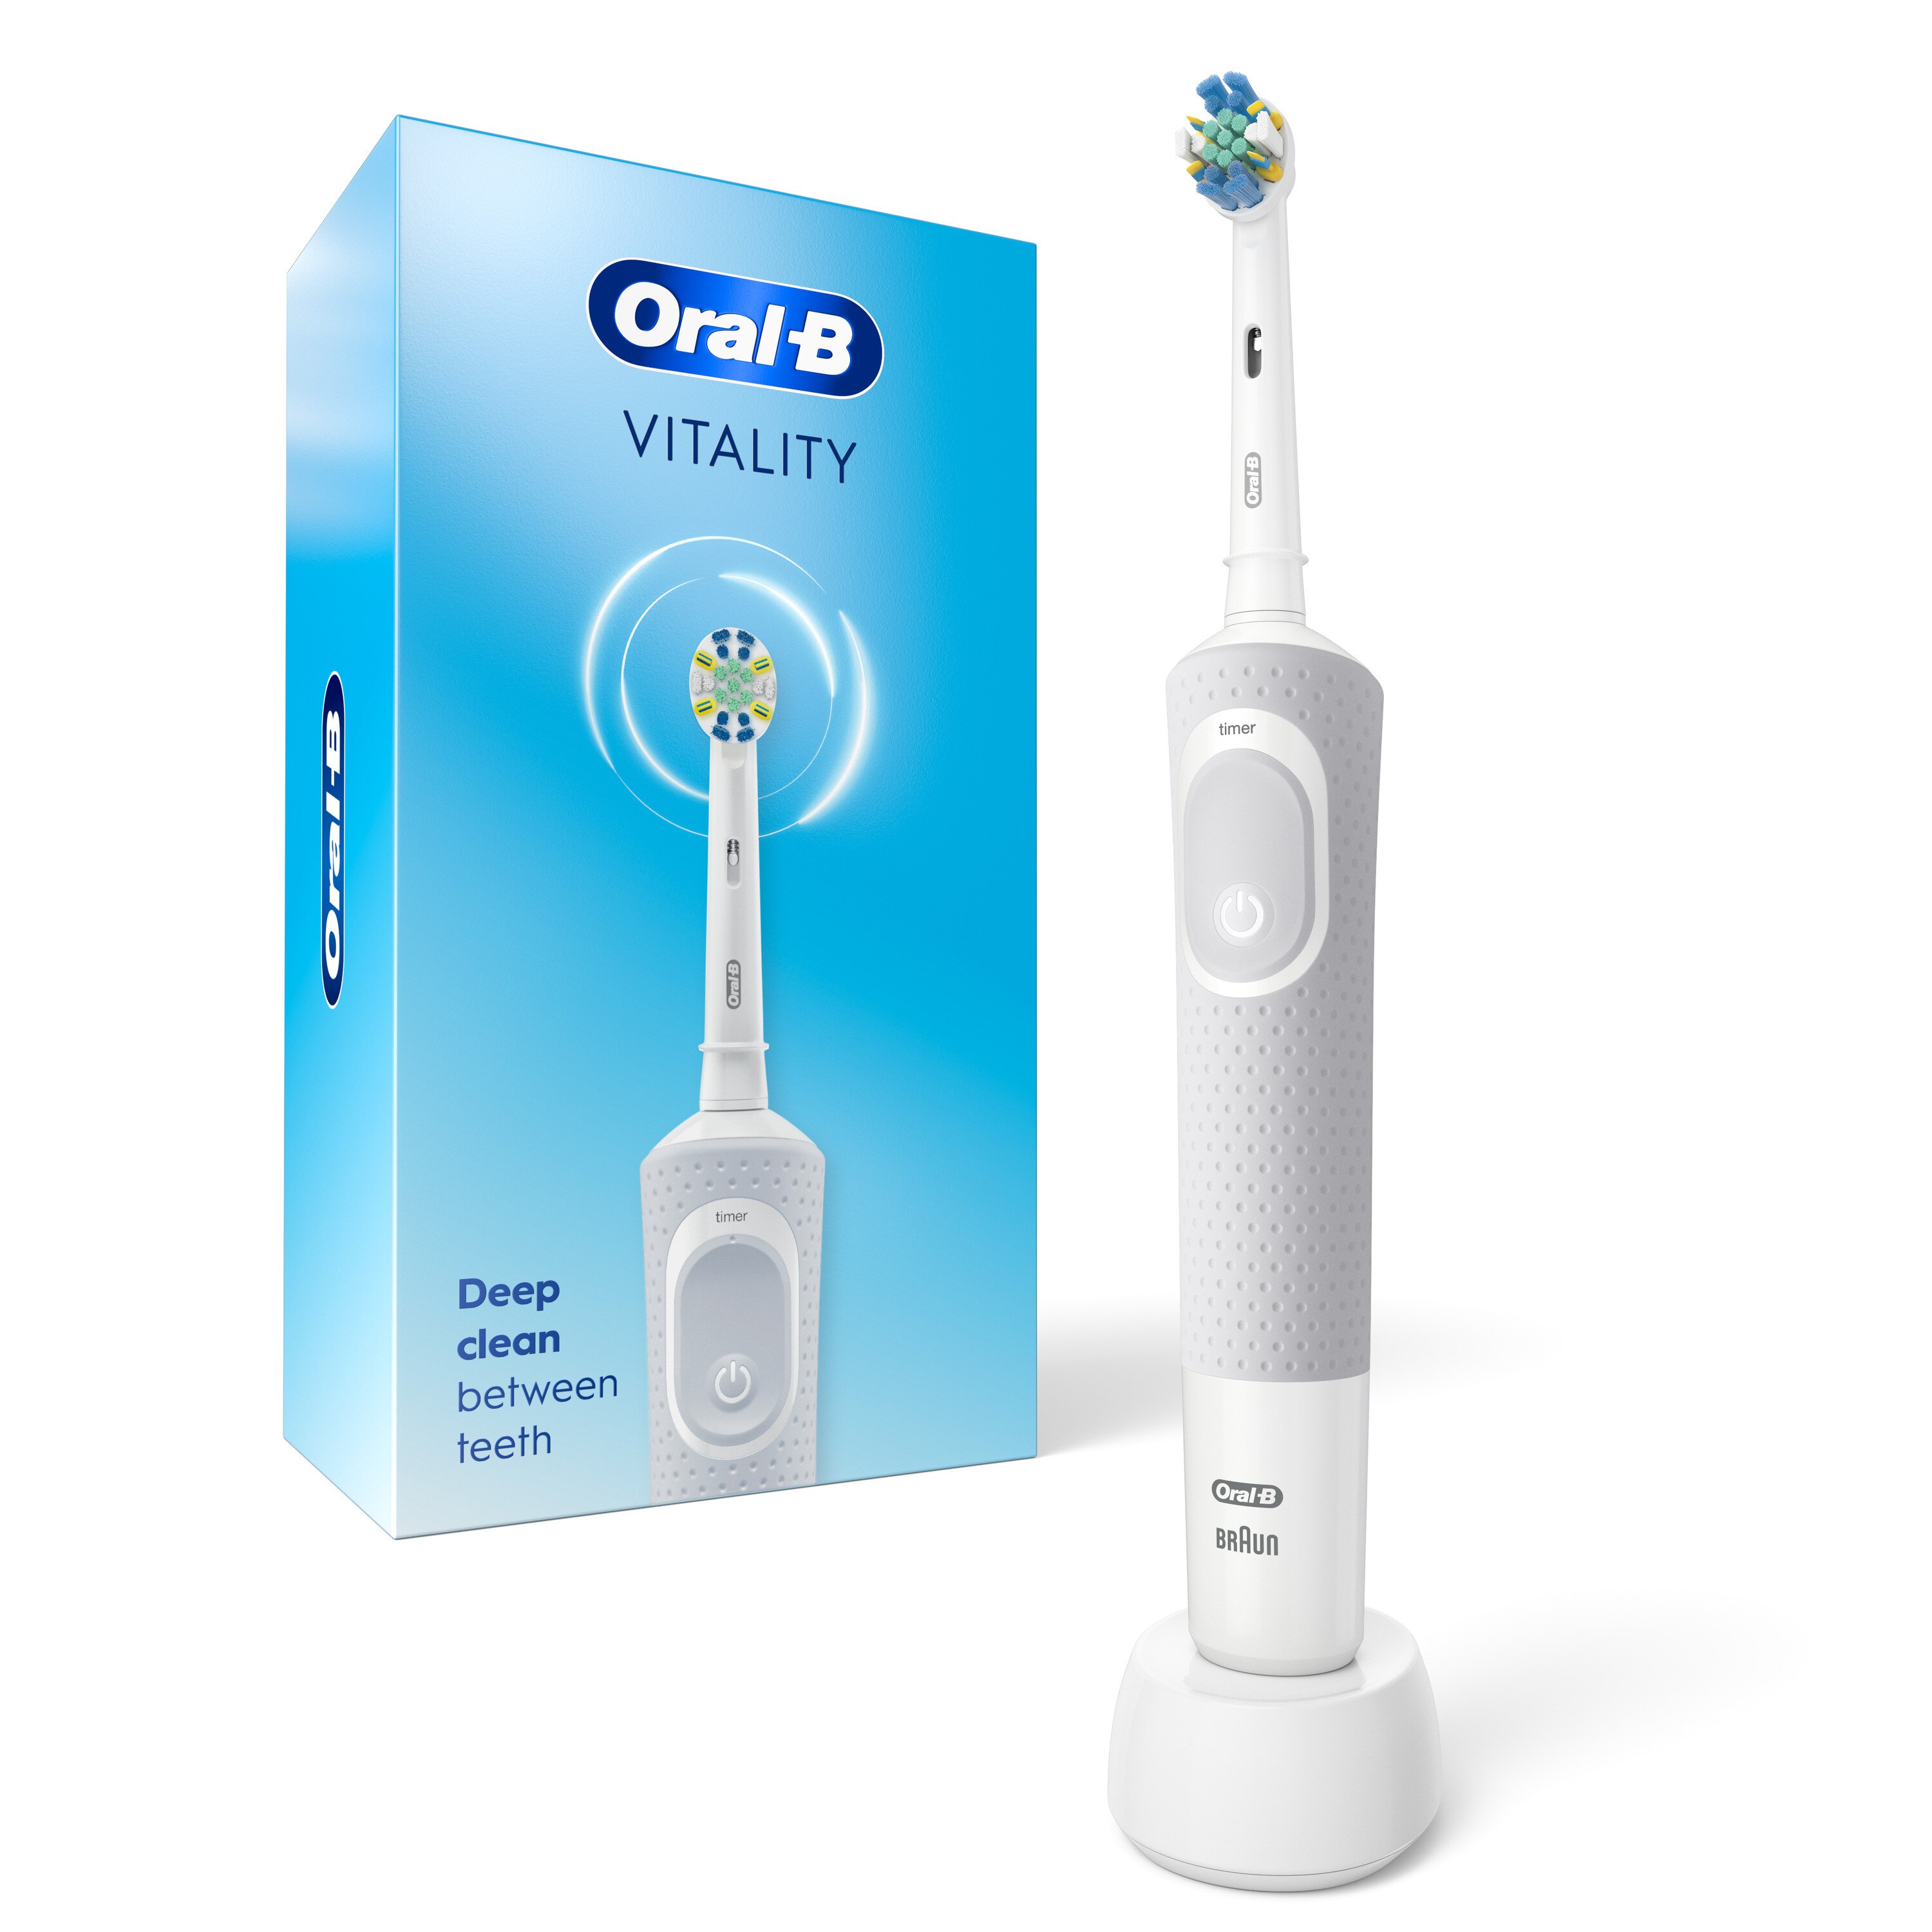 Vermoorden Wereldwijd nicht Oral-B Vitality FlossAction Electric Rechargeable Toothbrush, powered by  Braun | Pick Up In Store TODAY at CVS